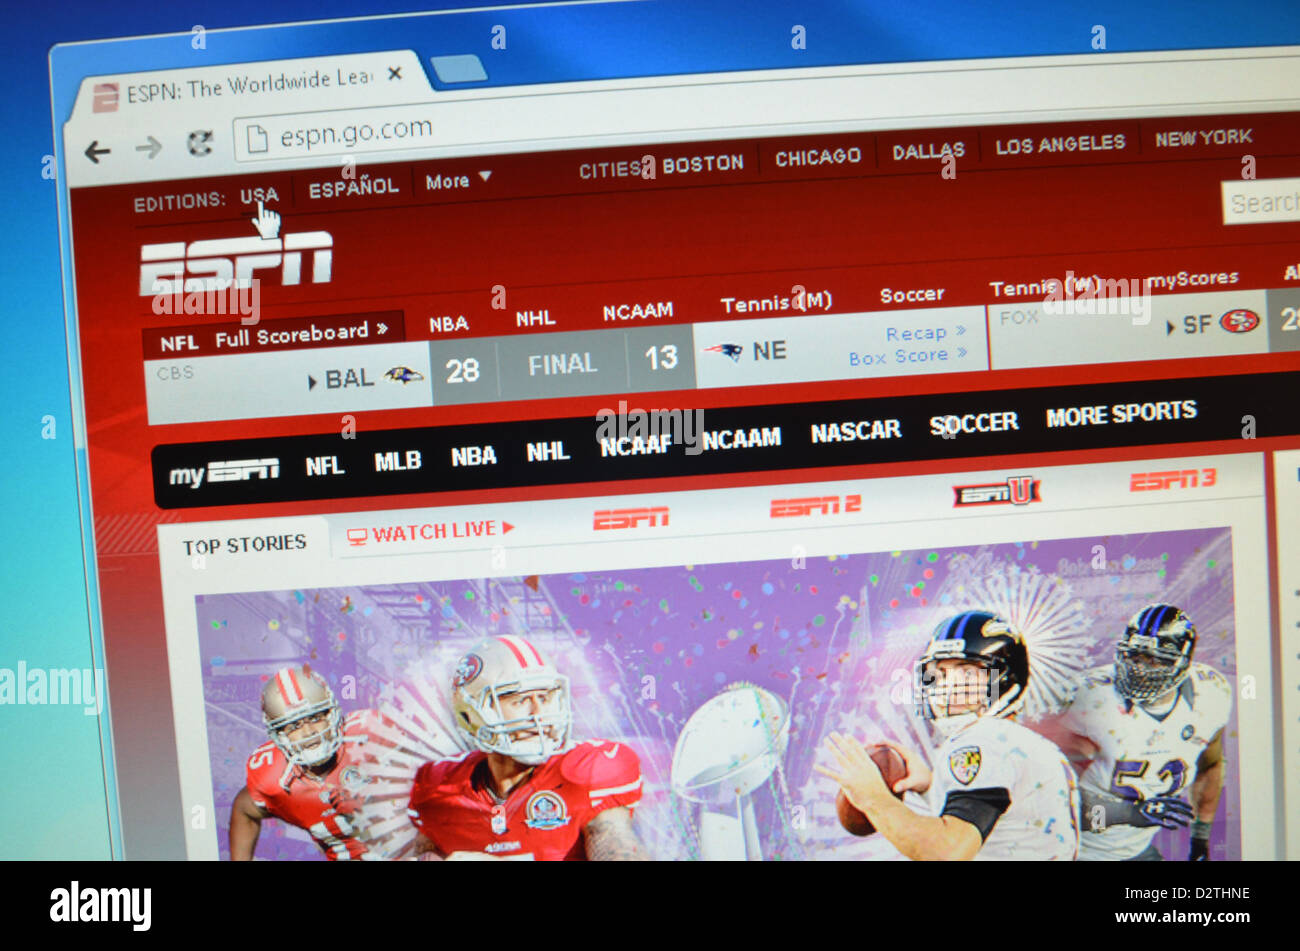 espn nfl home page